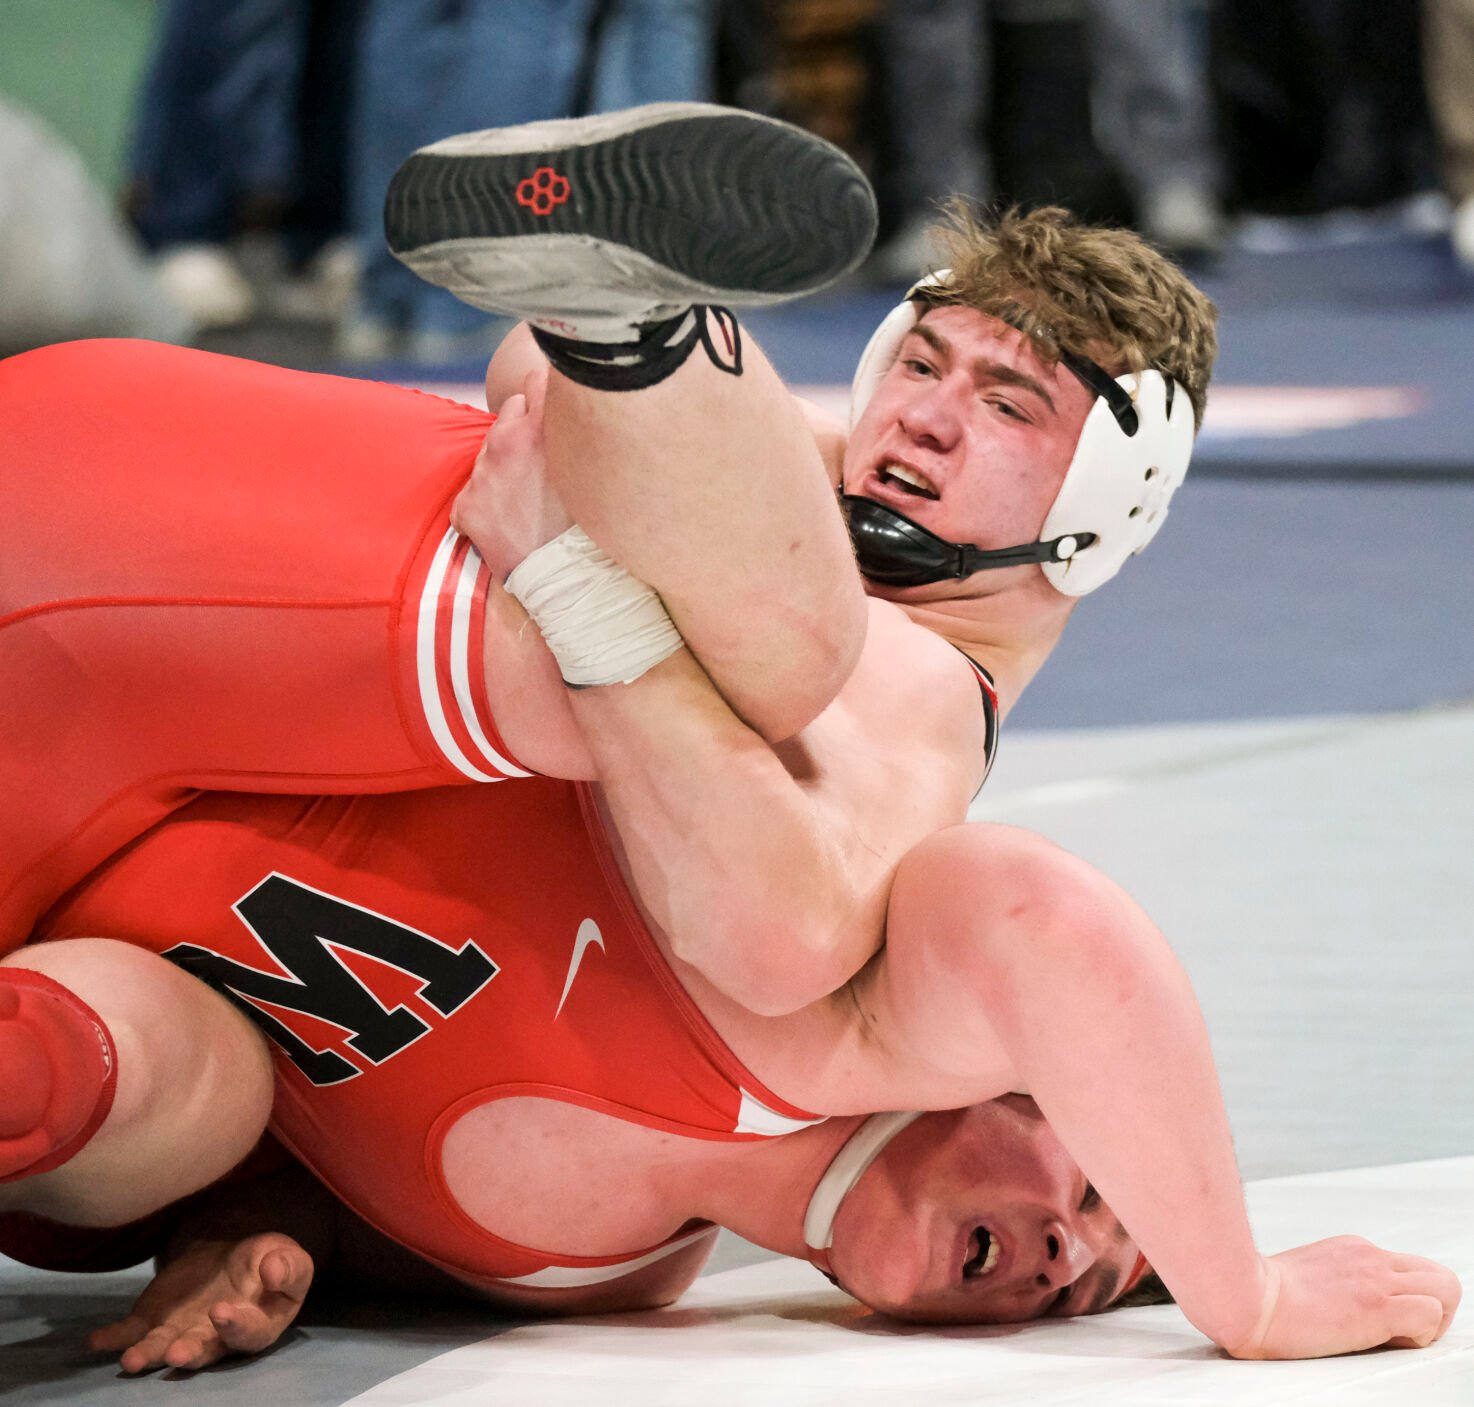 Local wrestlers take home silver at state meet Local Sports mankatofreepress pic